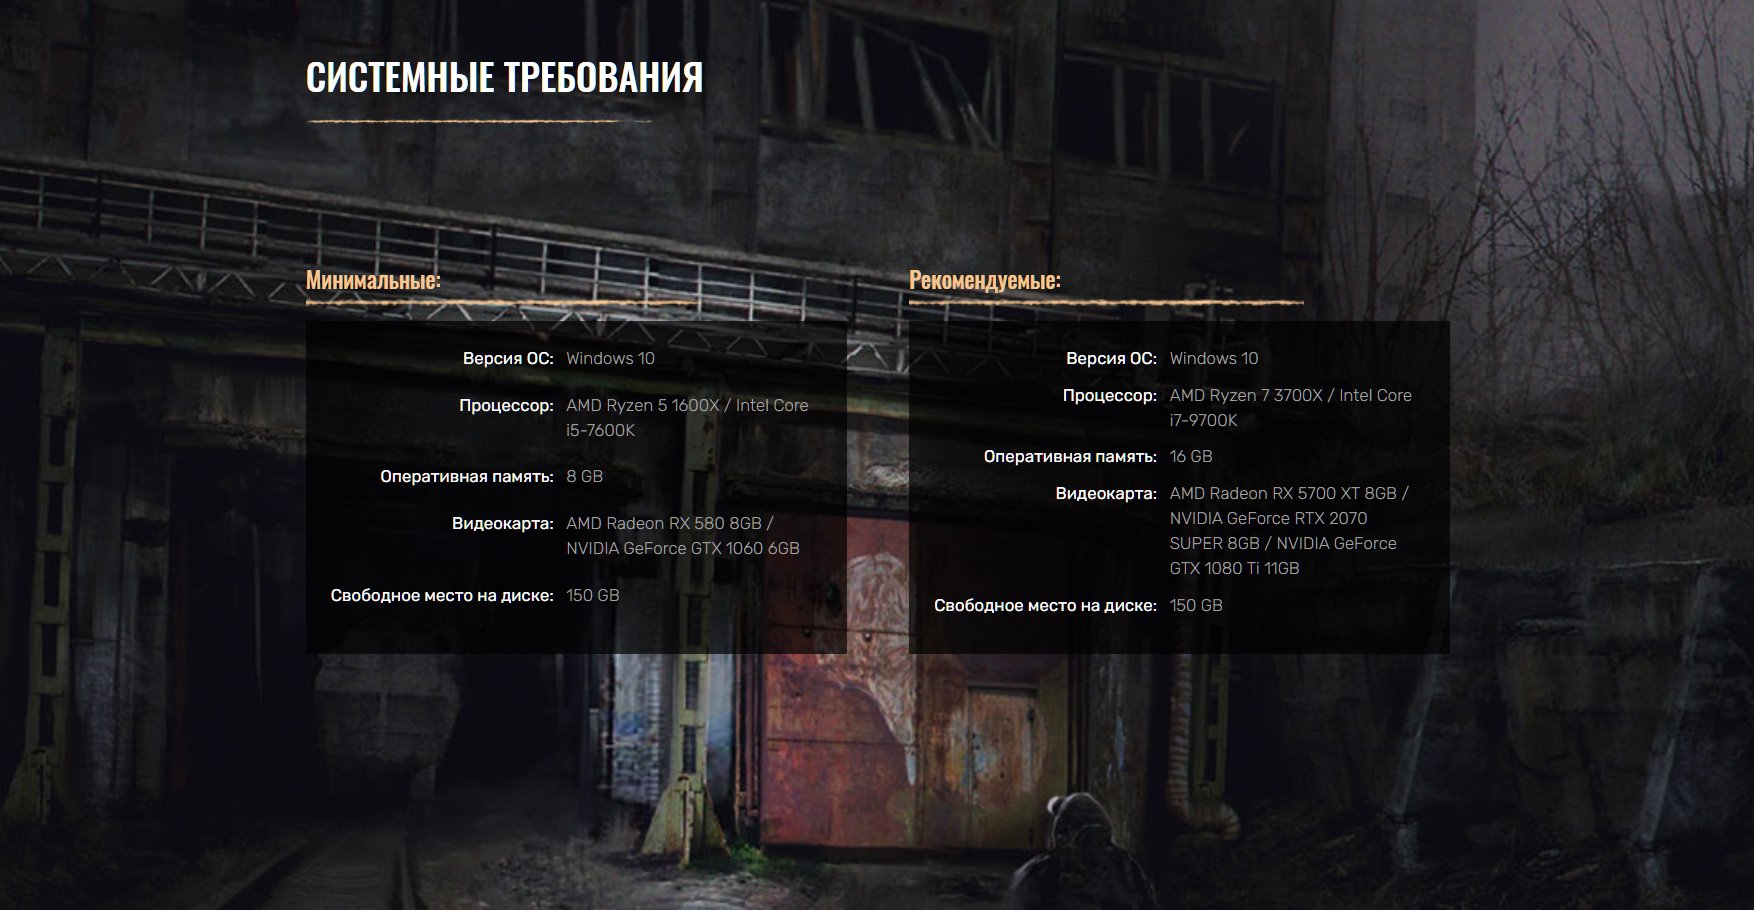 download the new version S.T.A.L.K.E.R. 2: Heart of Chernobyl